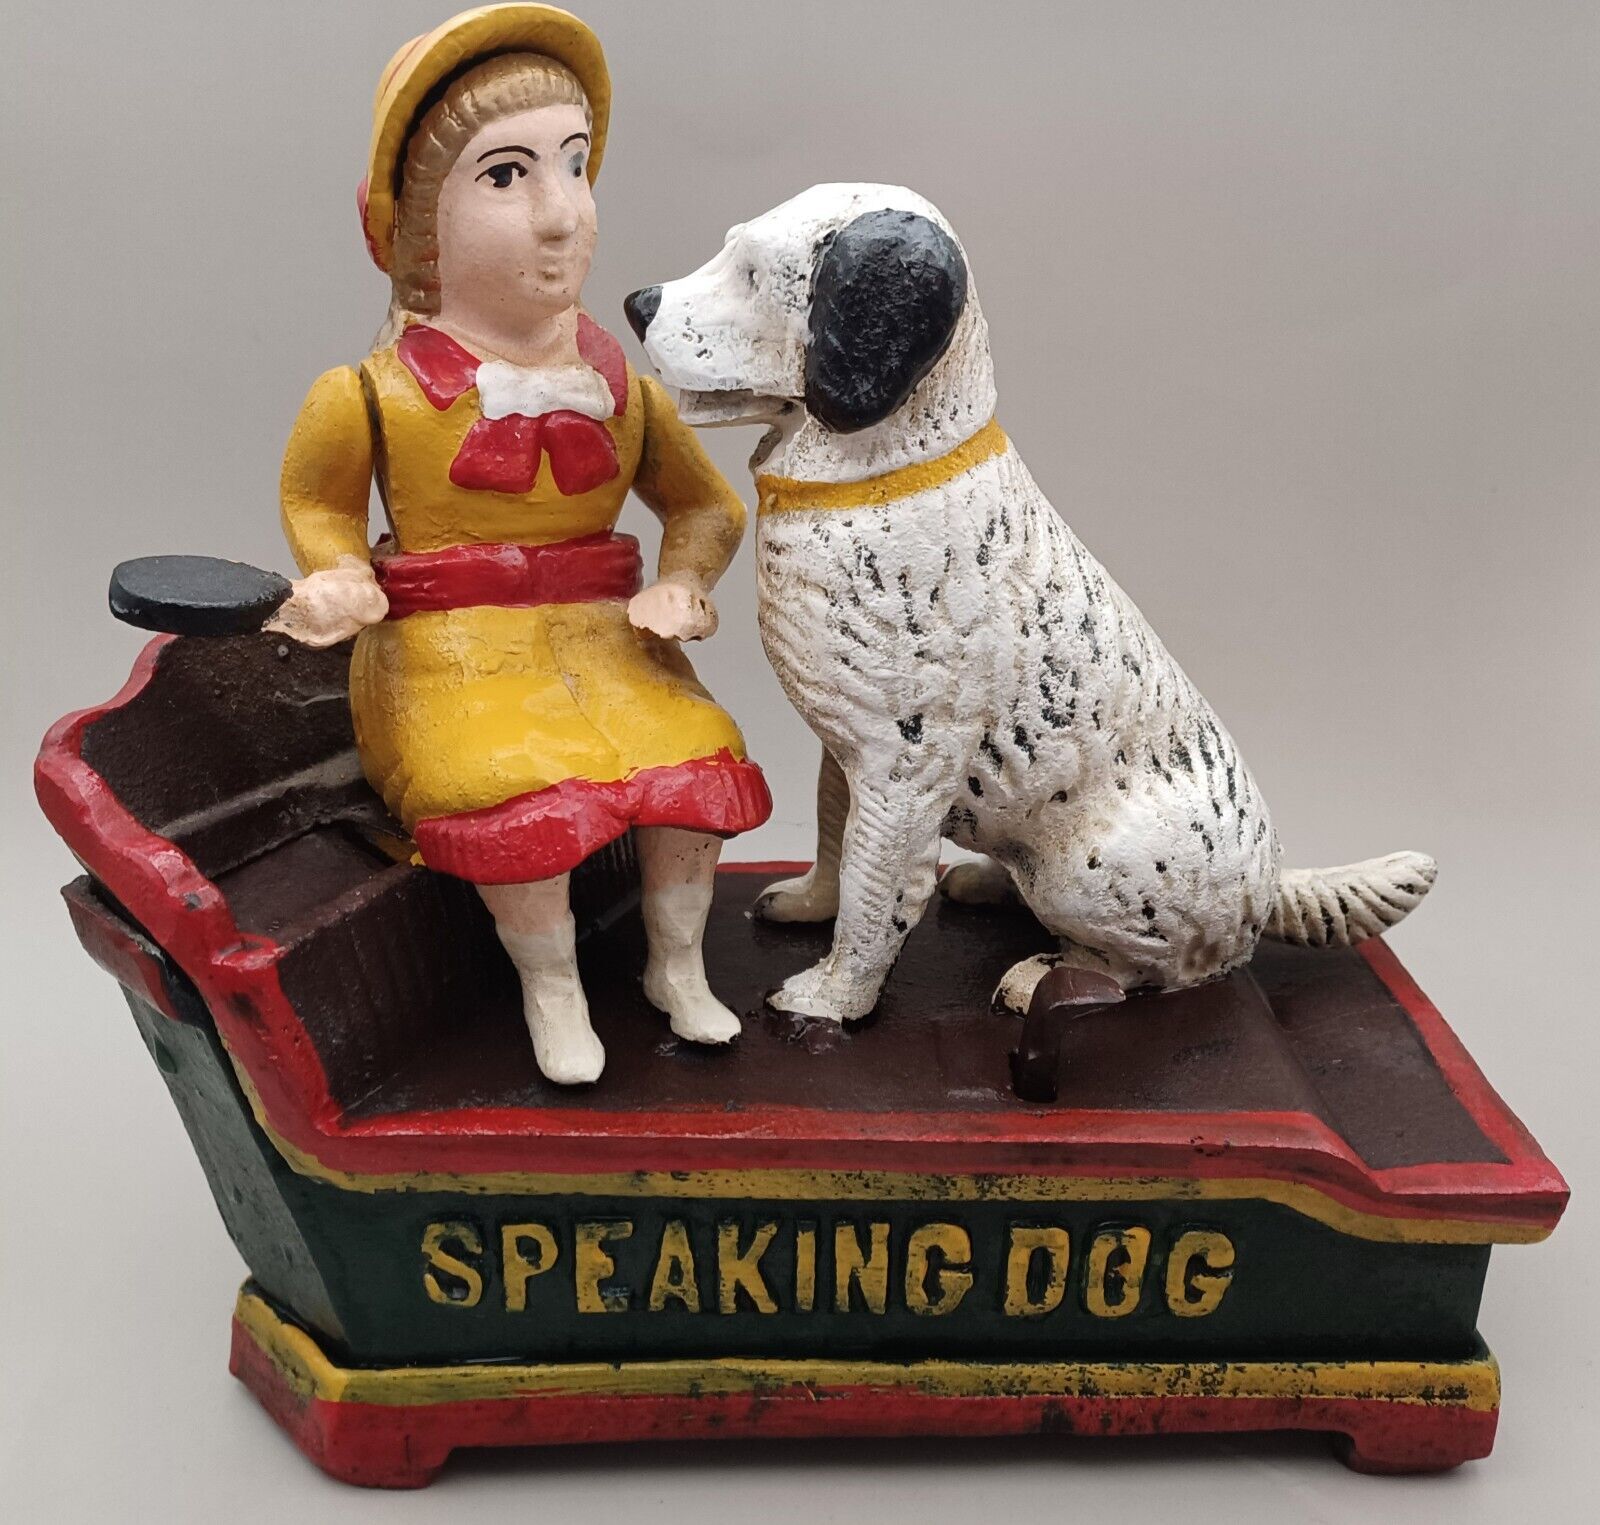 Vintage Antique CAST IRON Mechanical SPEAKING DOG Money Coin Bank Reproduction